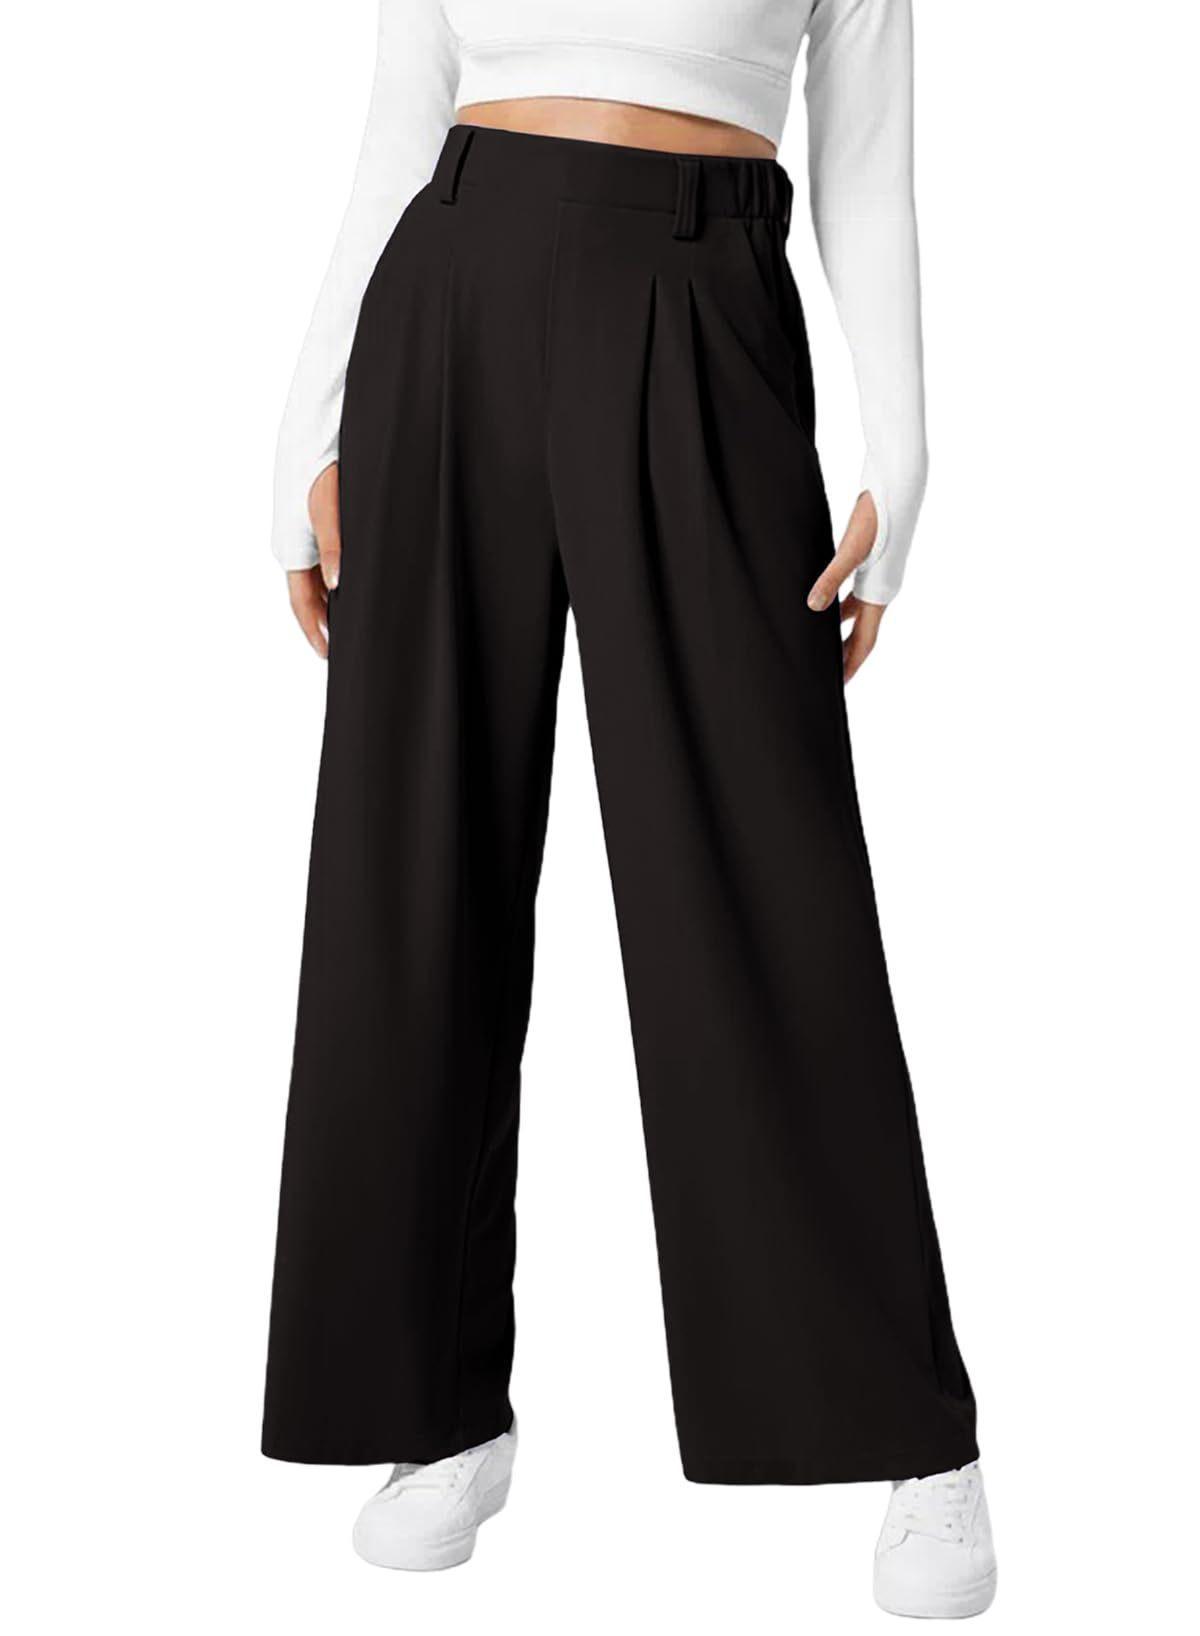 Women's Wide Leg Pants Elastic High Waist Waffle Knit Casual | MODE BY OH